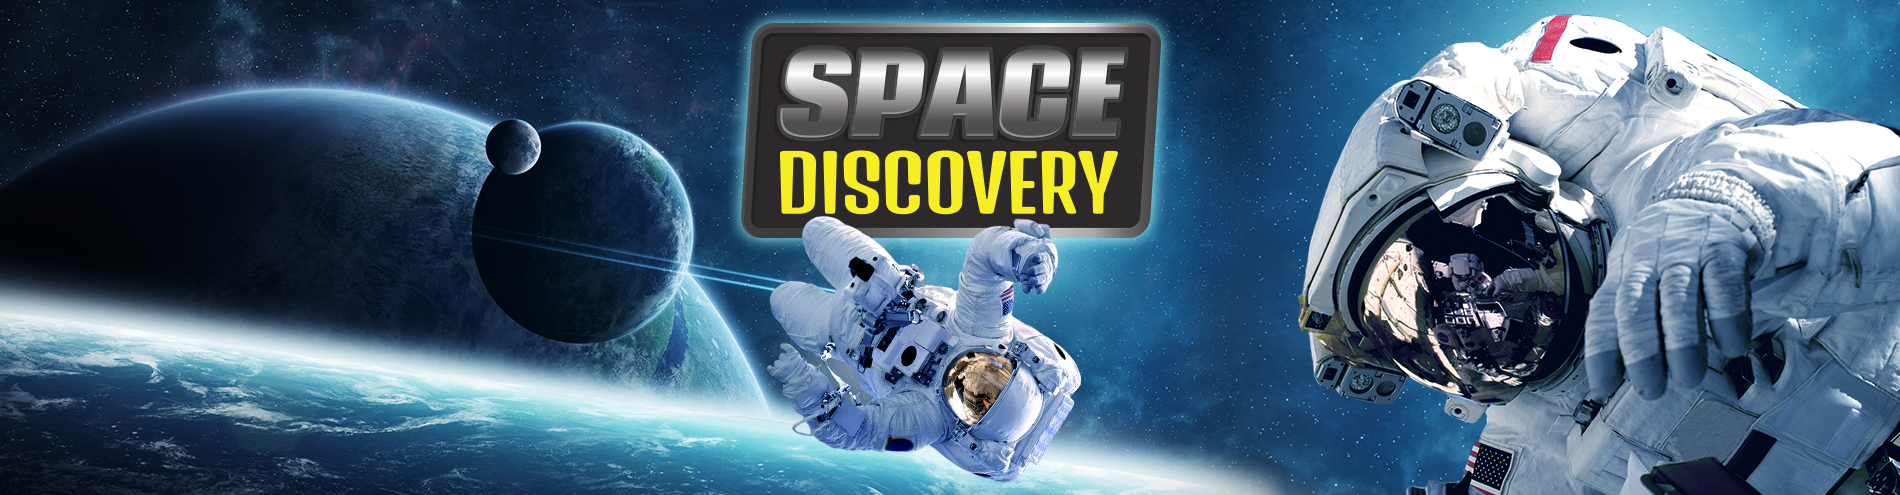 Space Discovery Header